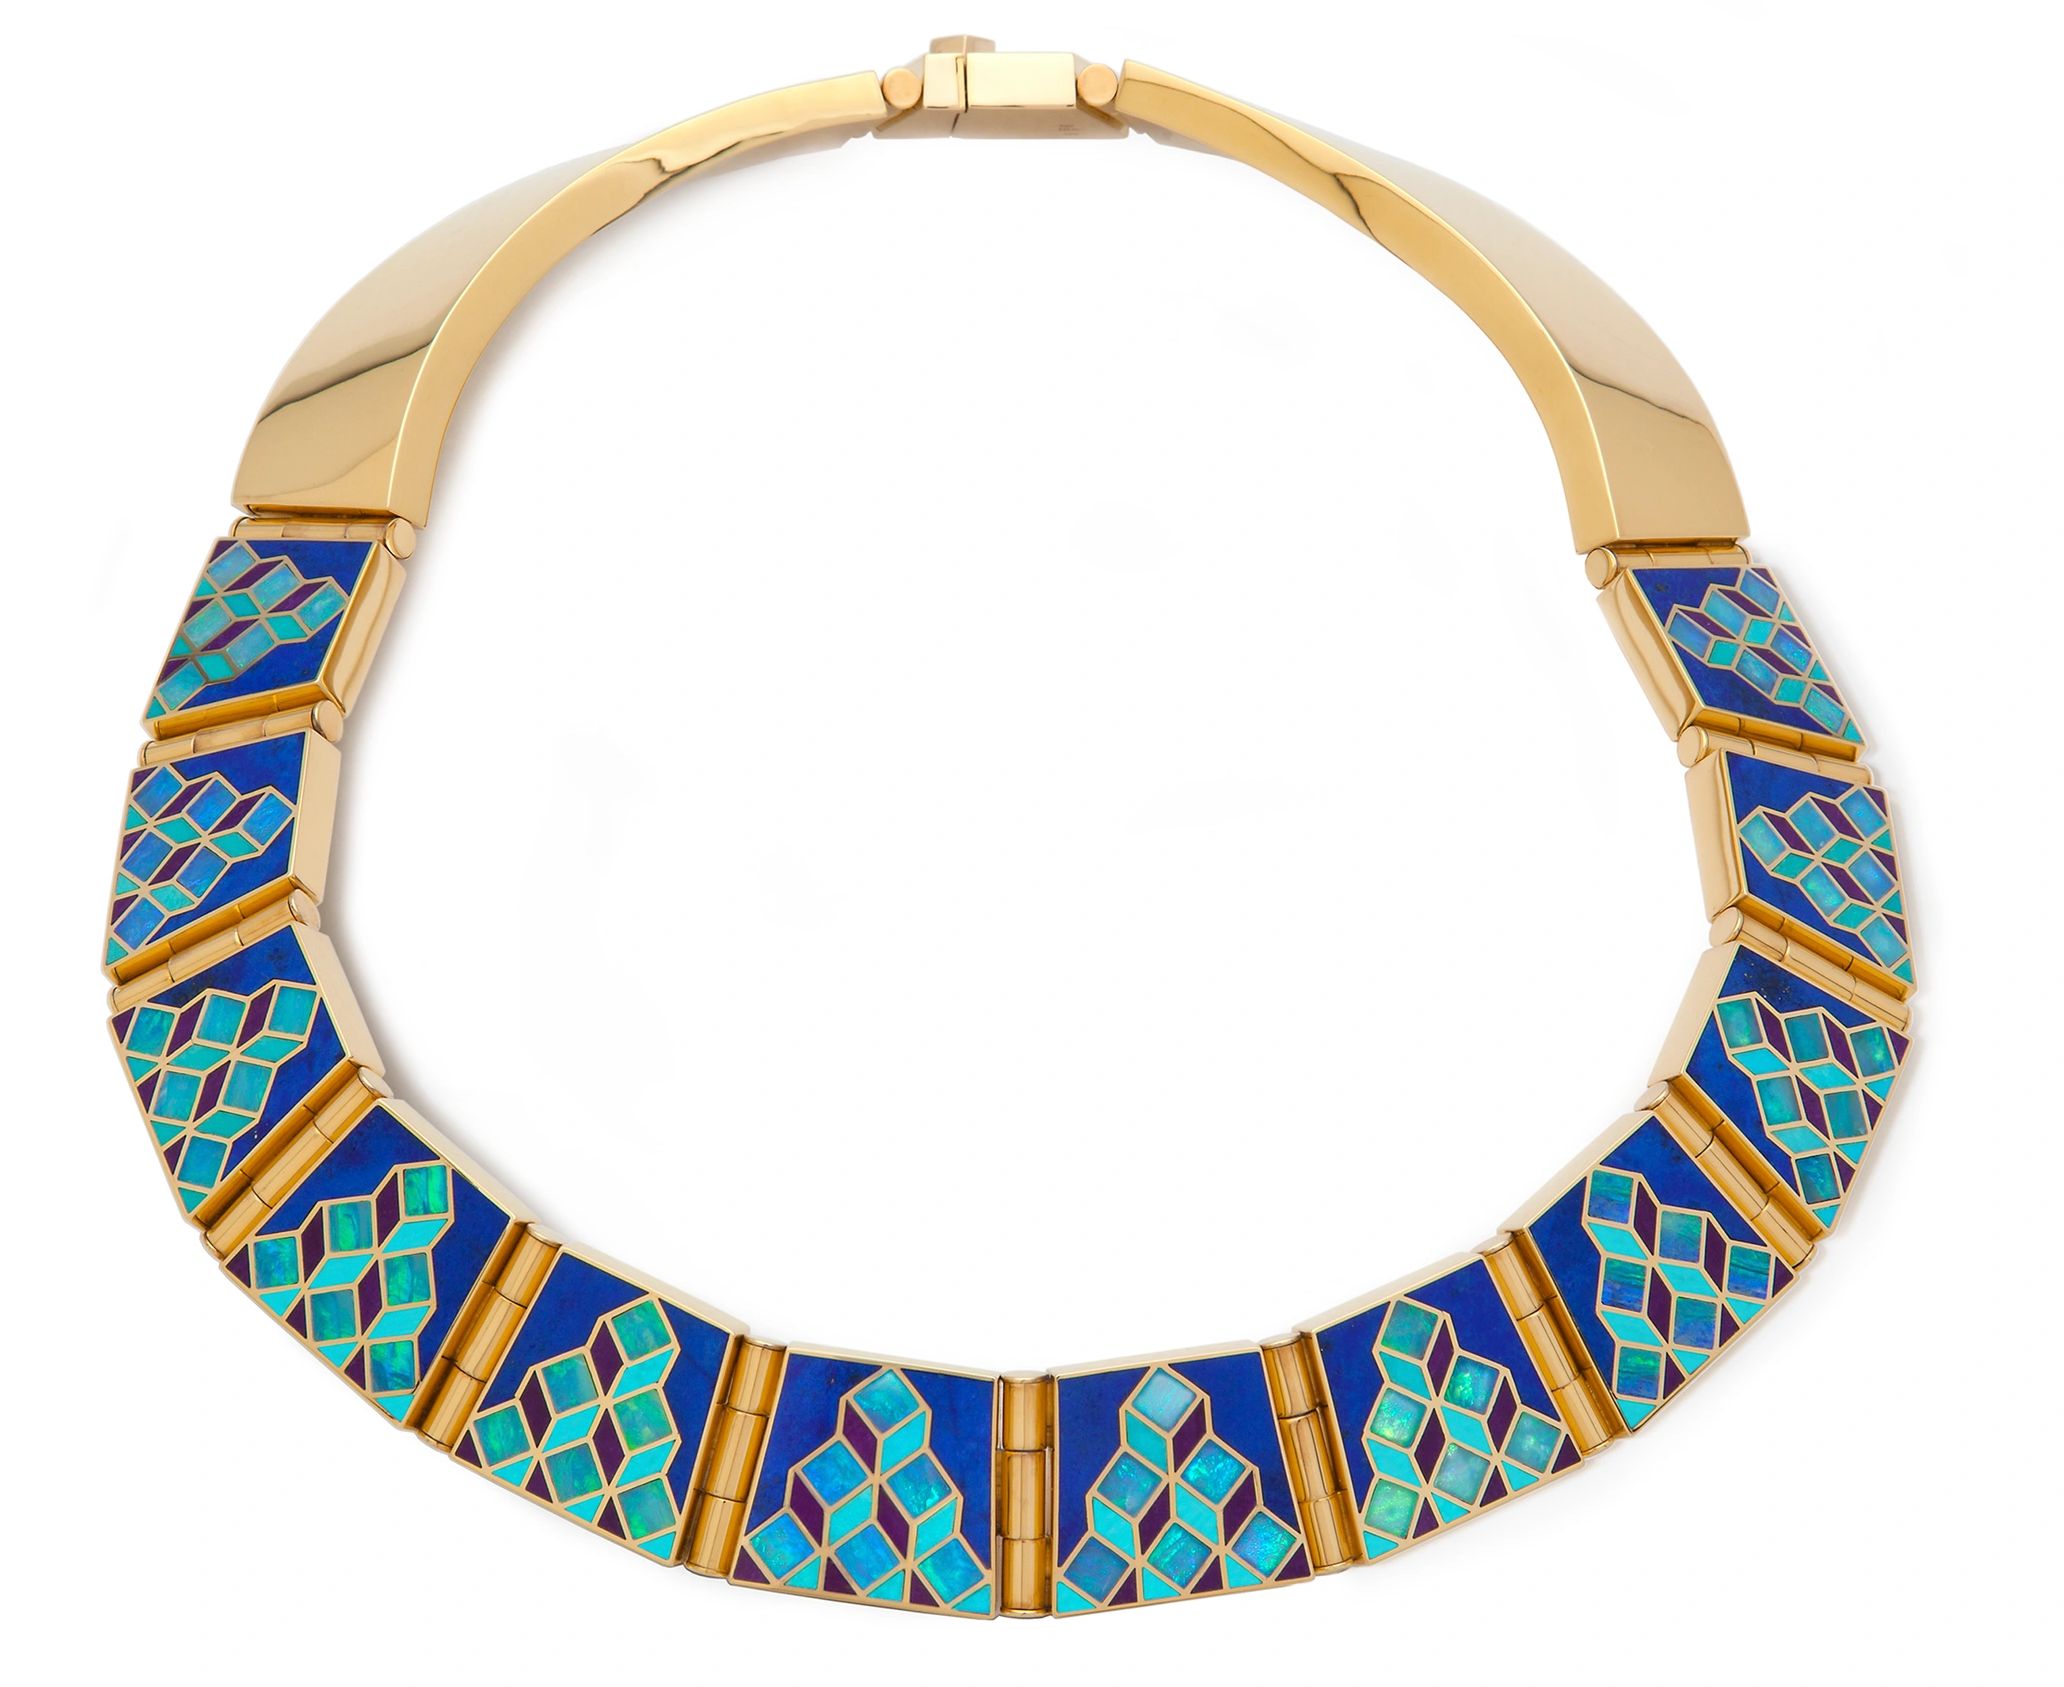 Chiaroscuro and Synthetism Art movement implied through stone inlay in this magnificent collar.  